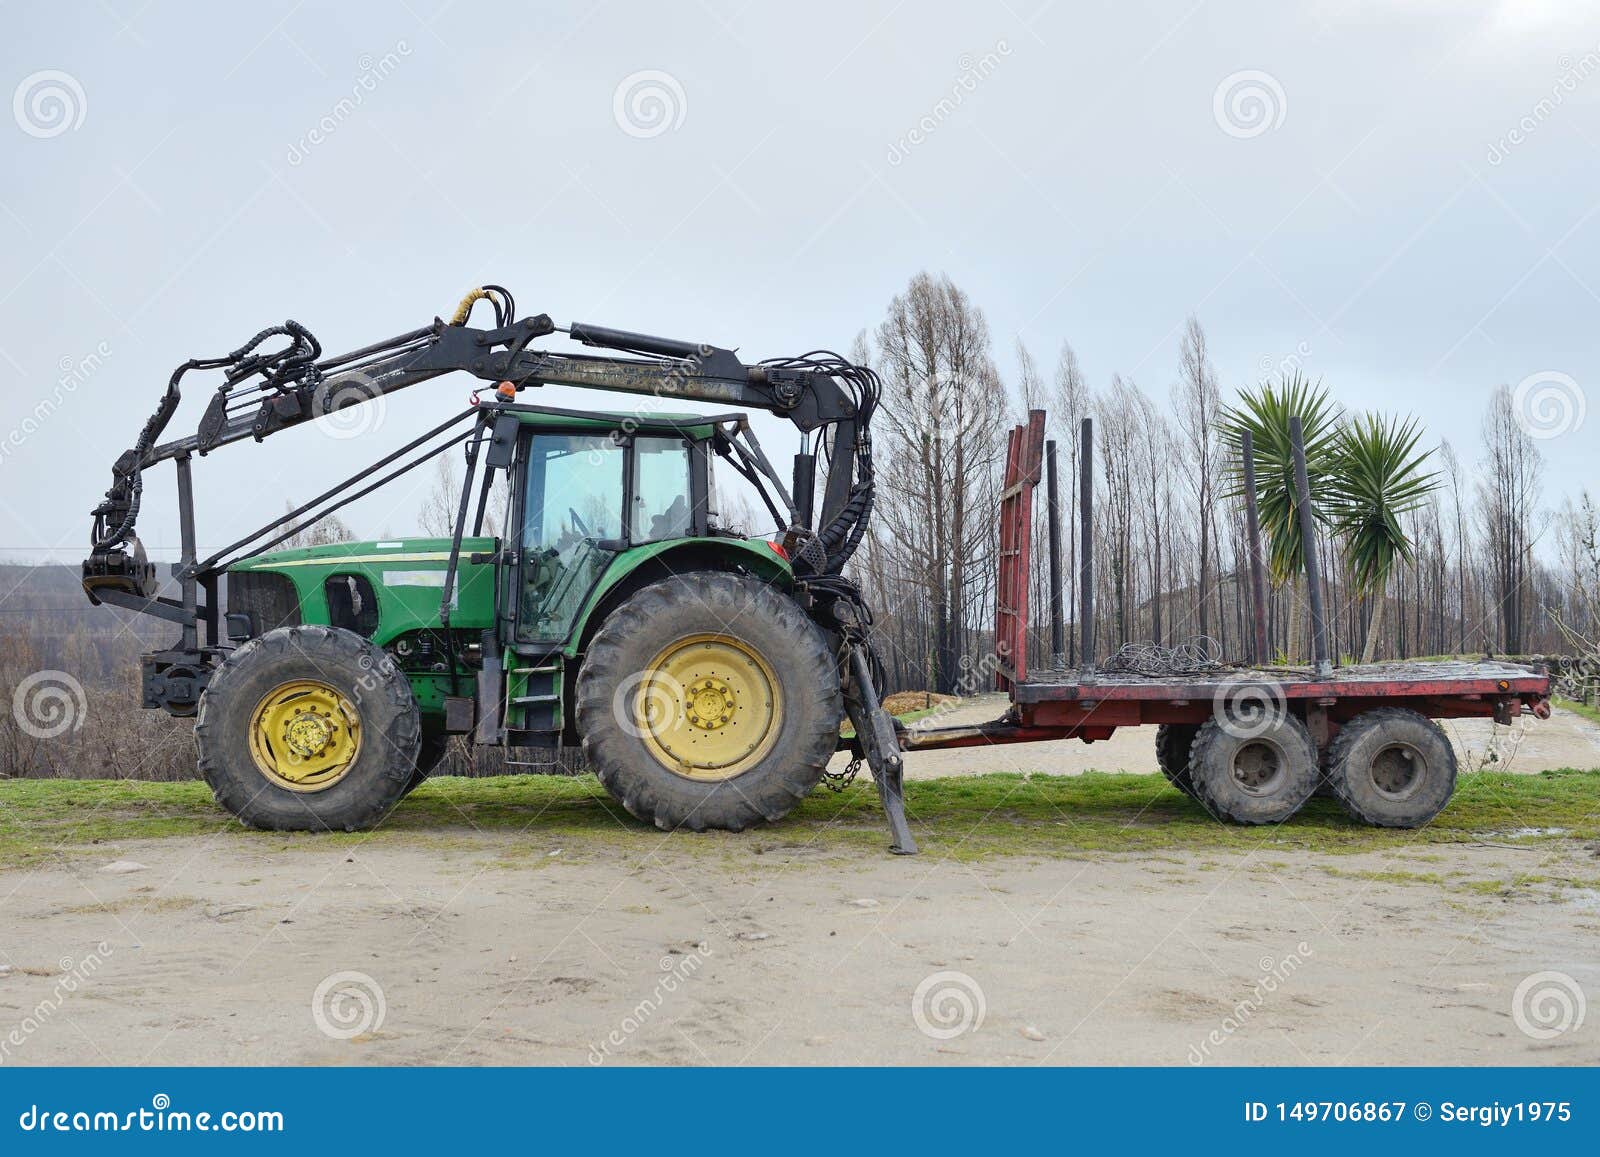 Green Farm Tractor with Trailer Editorial Photography - Image of grain ...